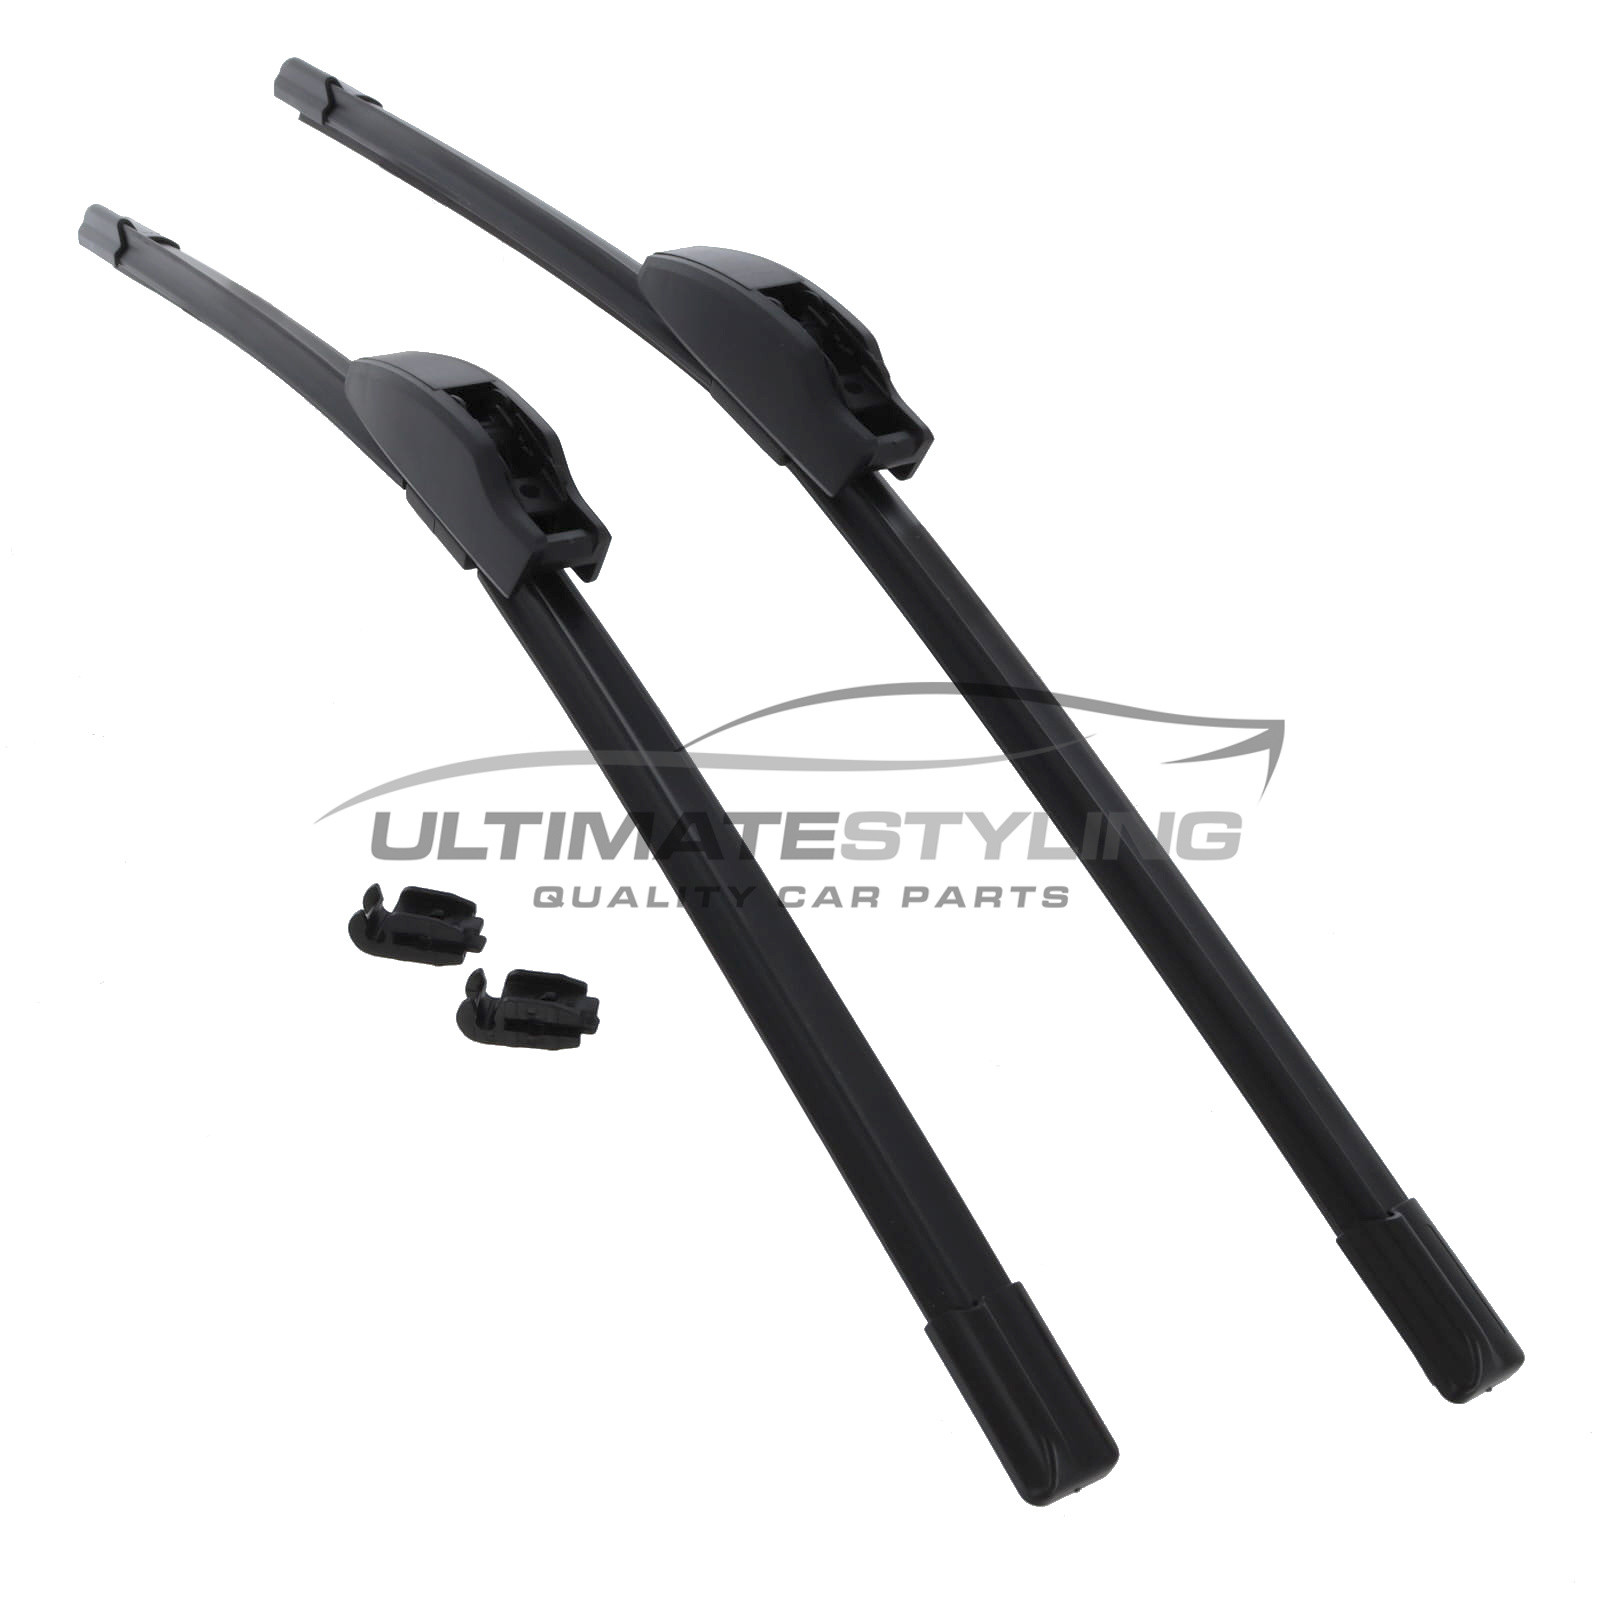 Drivers Side & Passenger Side (Front) Wiper Blades for Mercedes Benz 200 Series